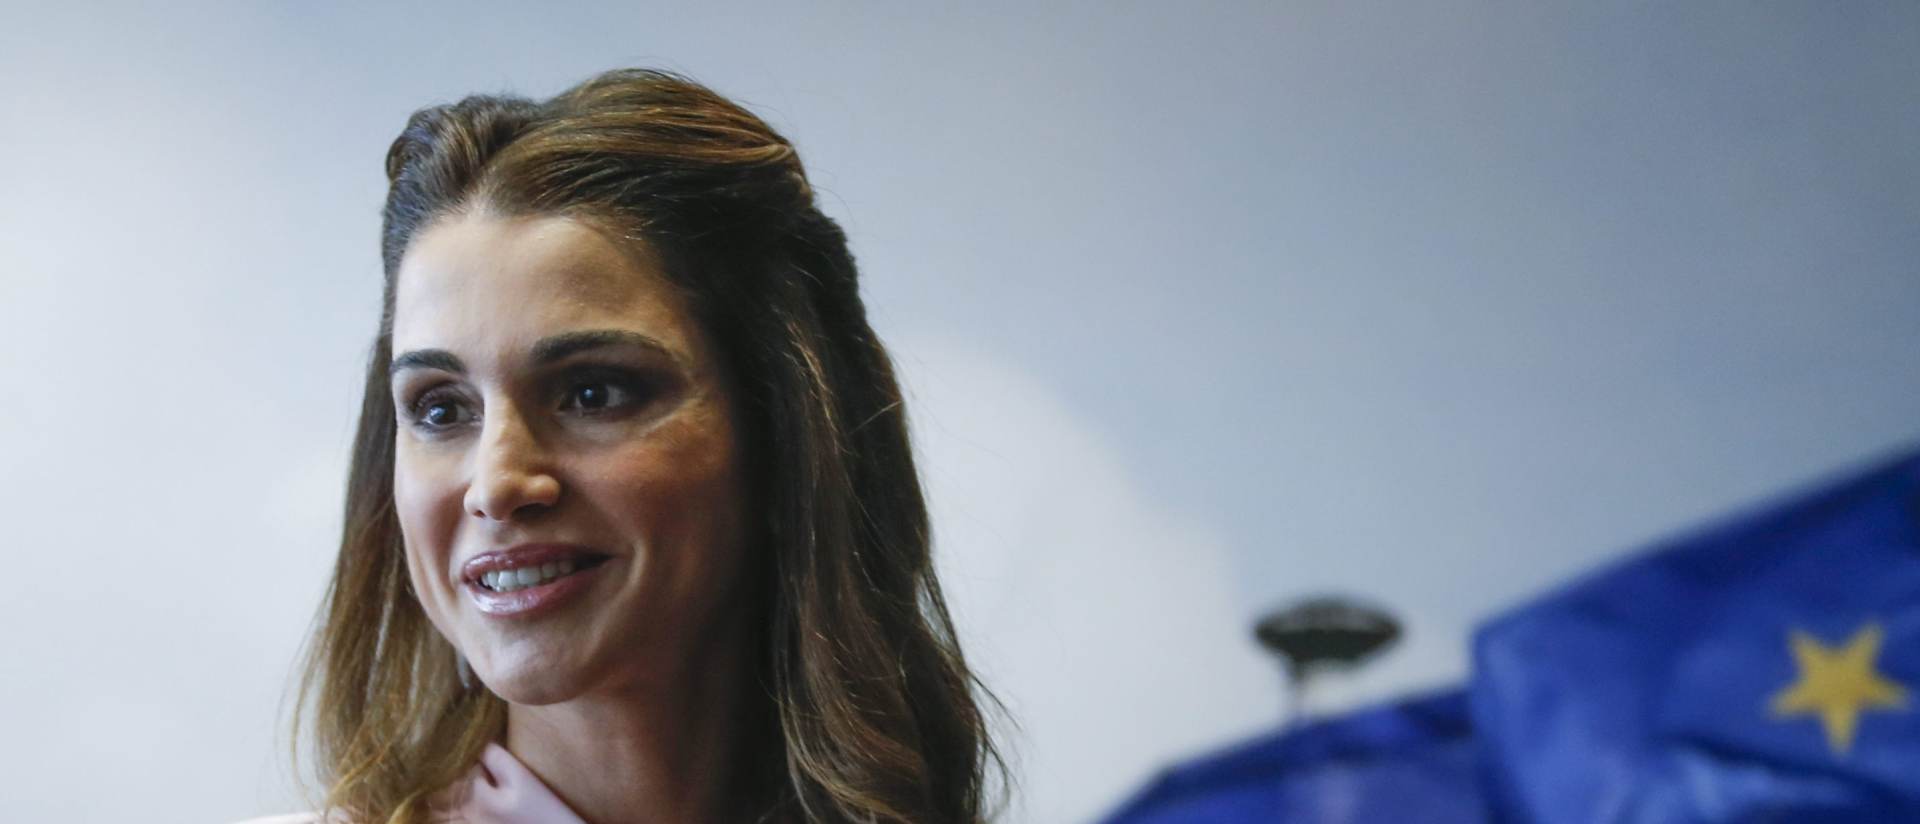 epa05098731 Queen Rania of Jordan looks on during a visit to the EU headquarters where she is to have a meeting with European Commission President Jean Claude Juncker (not in picture) in Brussels, Belgium, 12 January 2016.  EPA/OLIVIER HOSLET